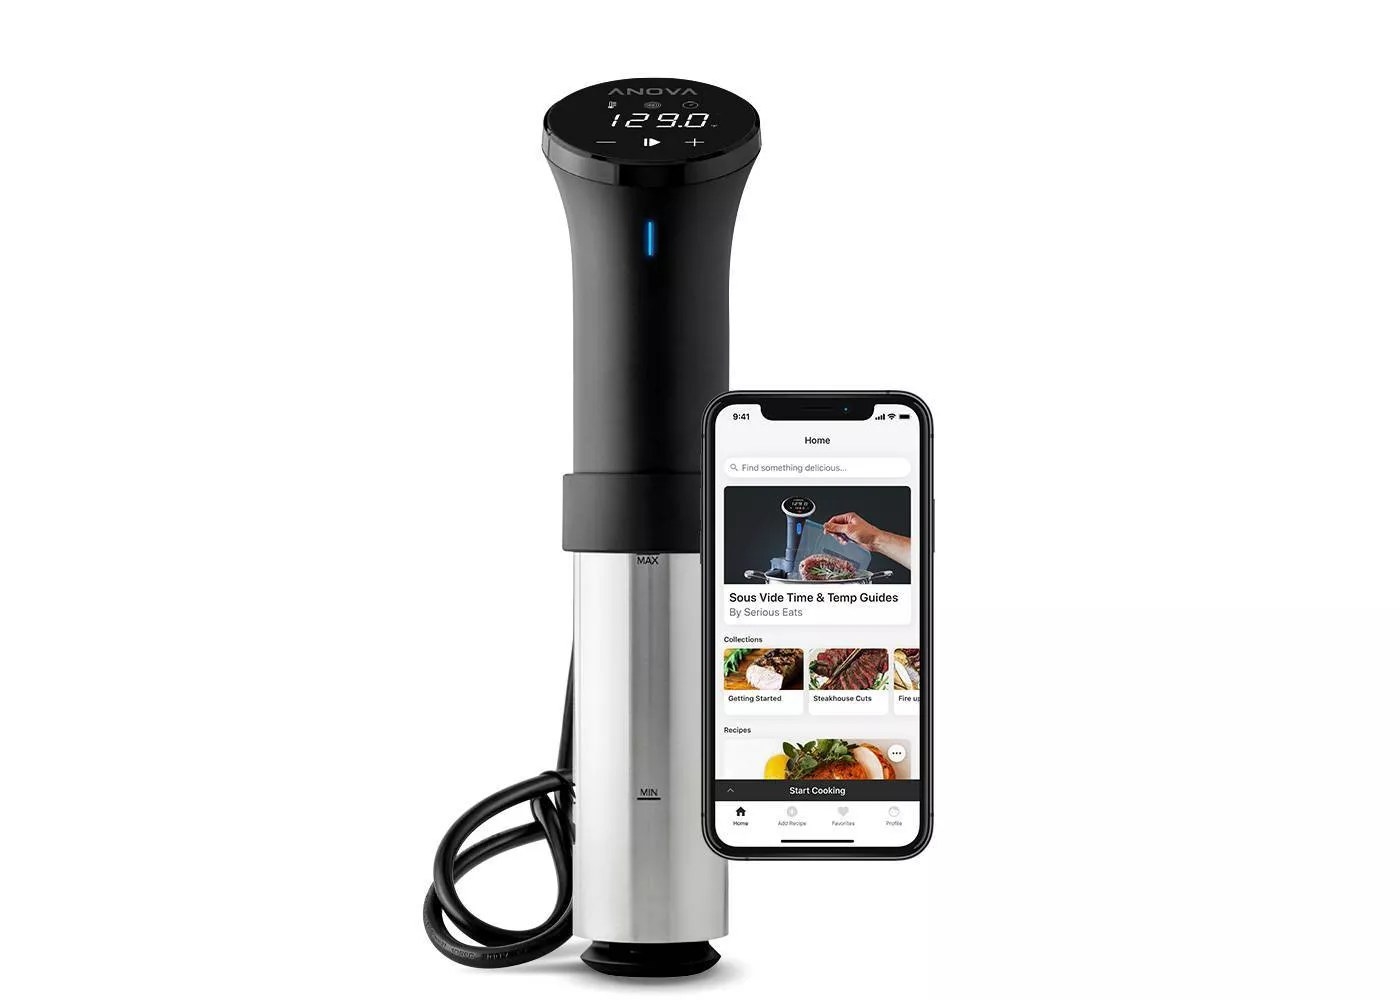 The sous vide cooker with the app